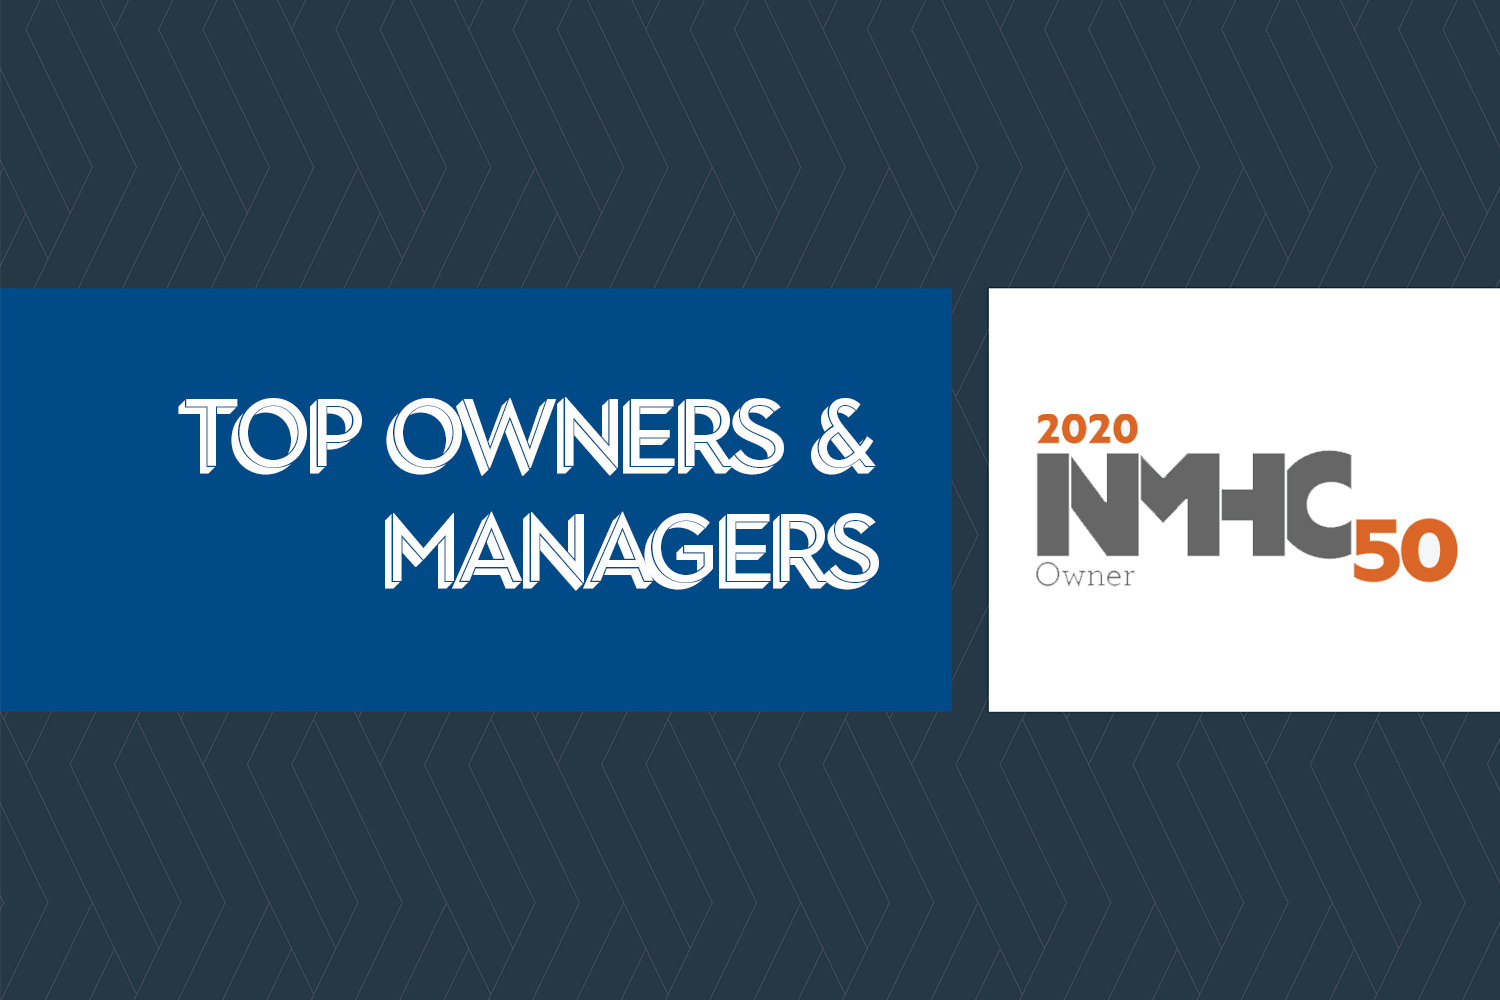 Balfour Beatty Communities named to 2020 Top Owners and Top Managers lists by NMHC